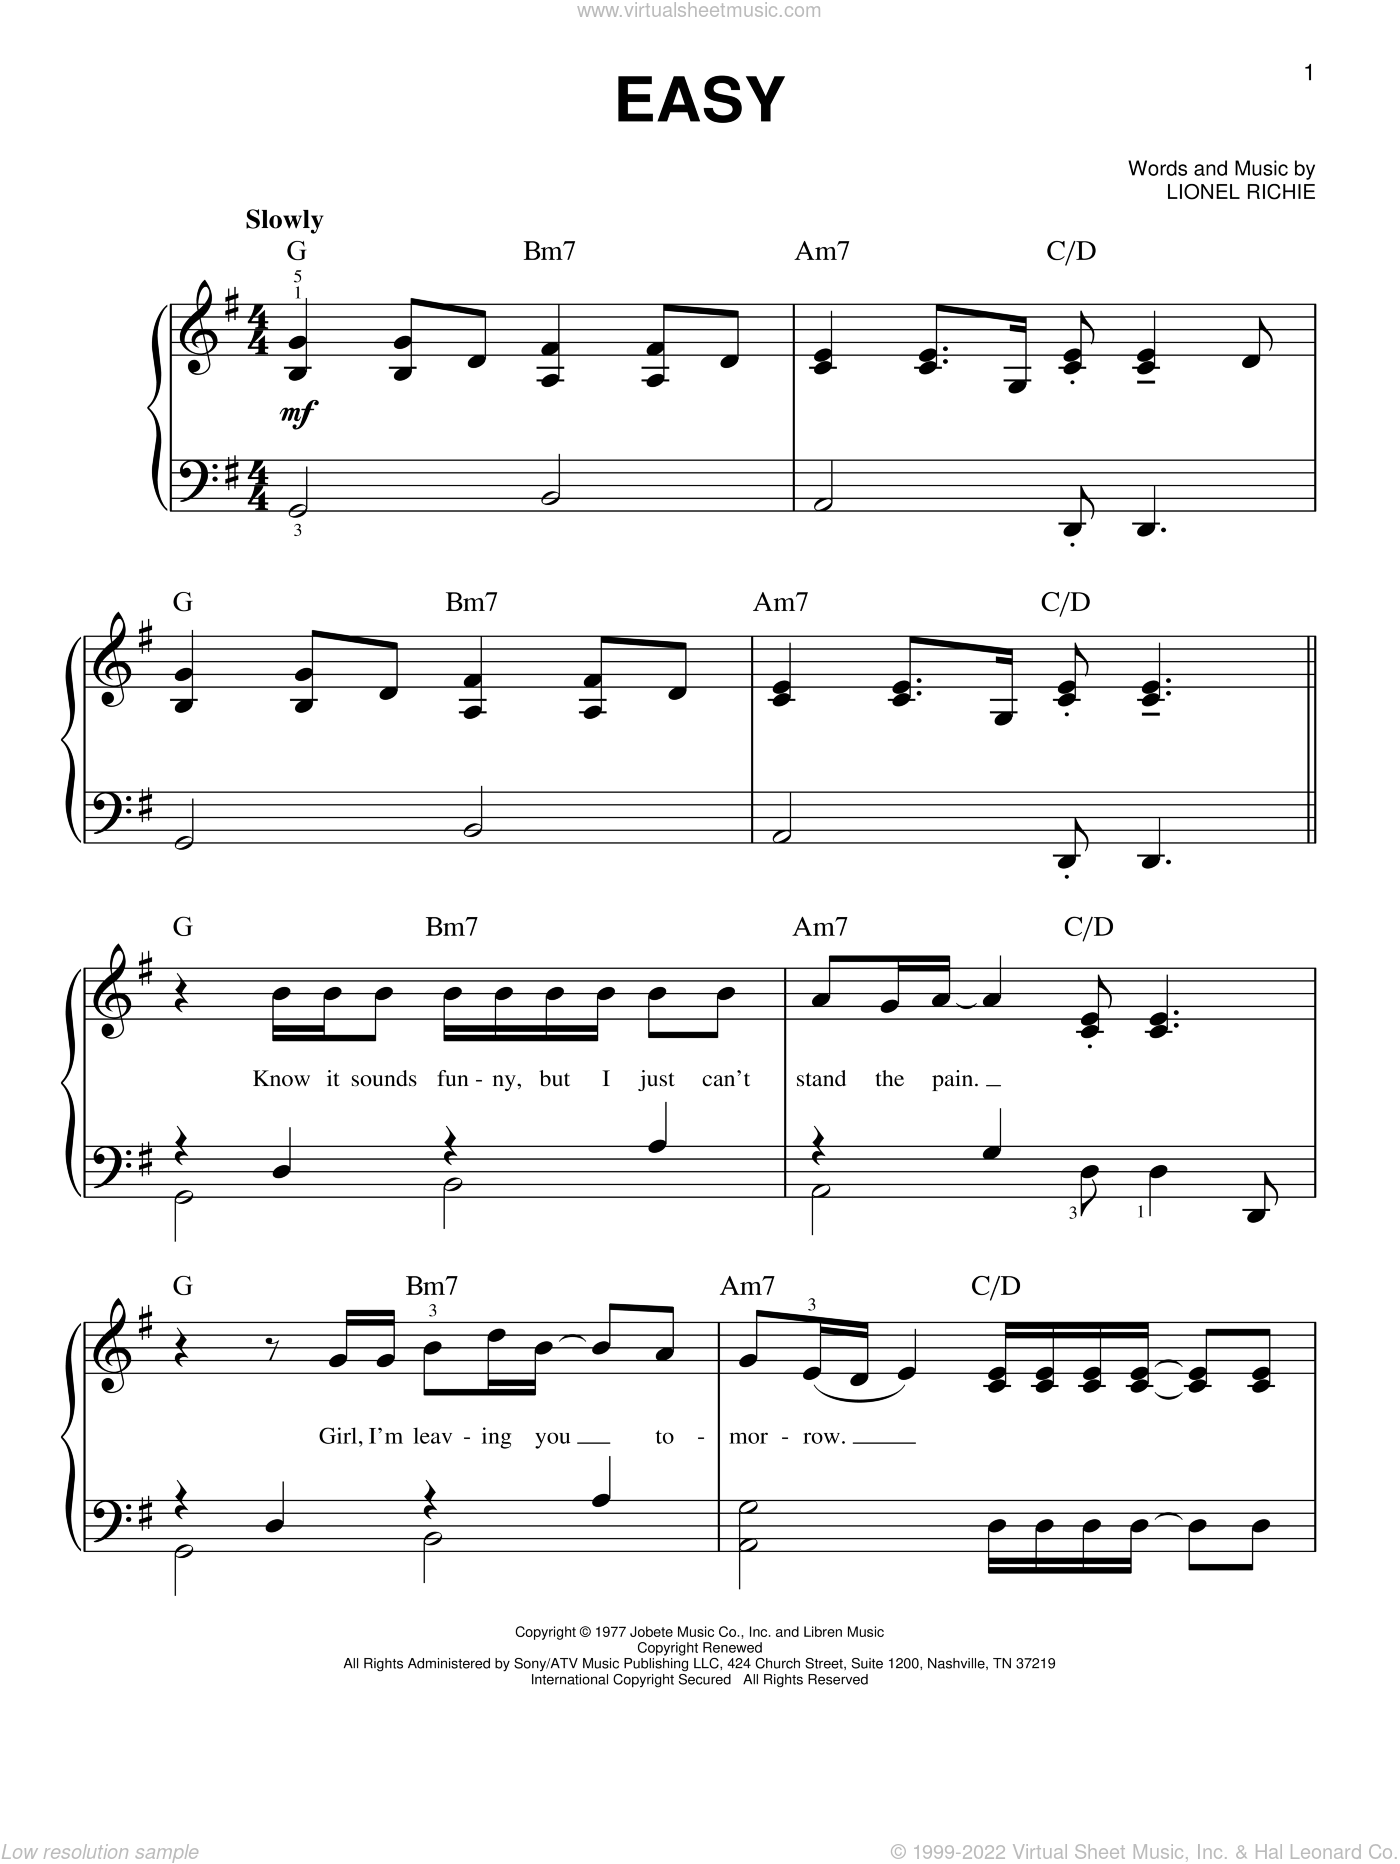 Richie - Easy sheet music for piano solo